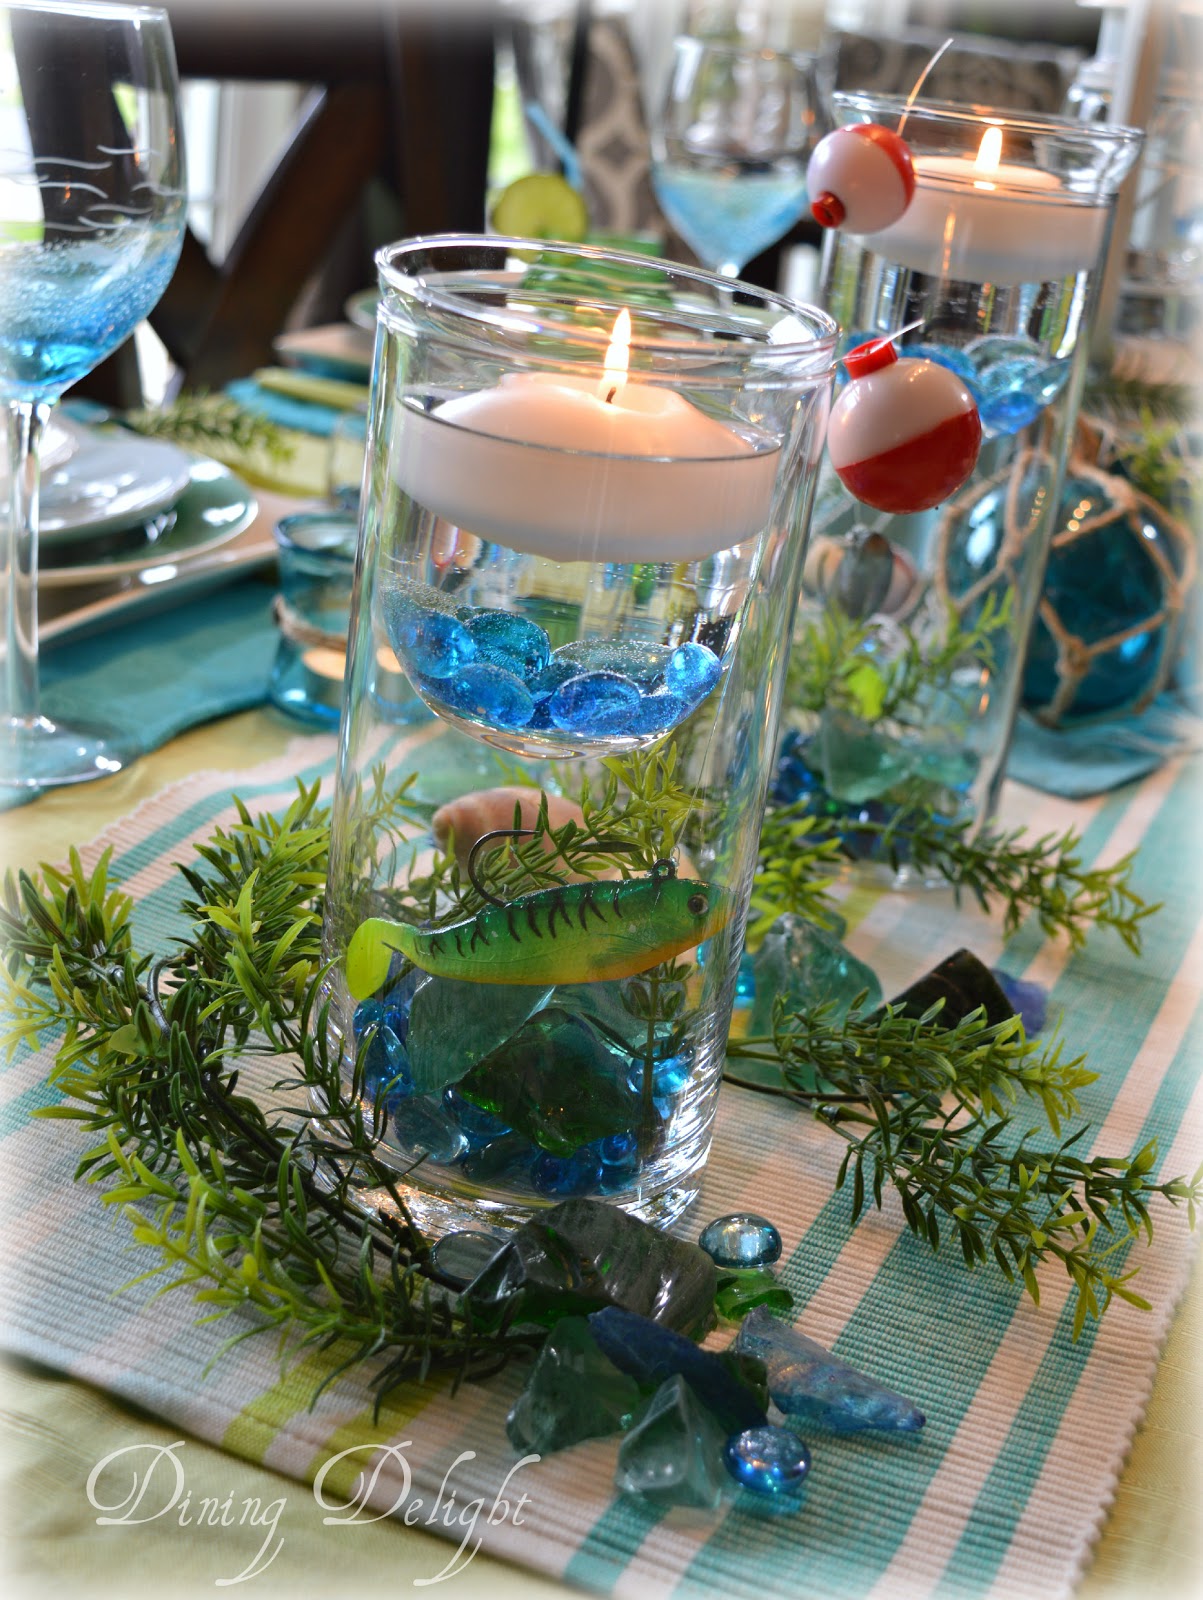 Dining Delight: Fishing Tablescape for Father's Day